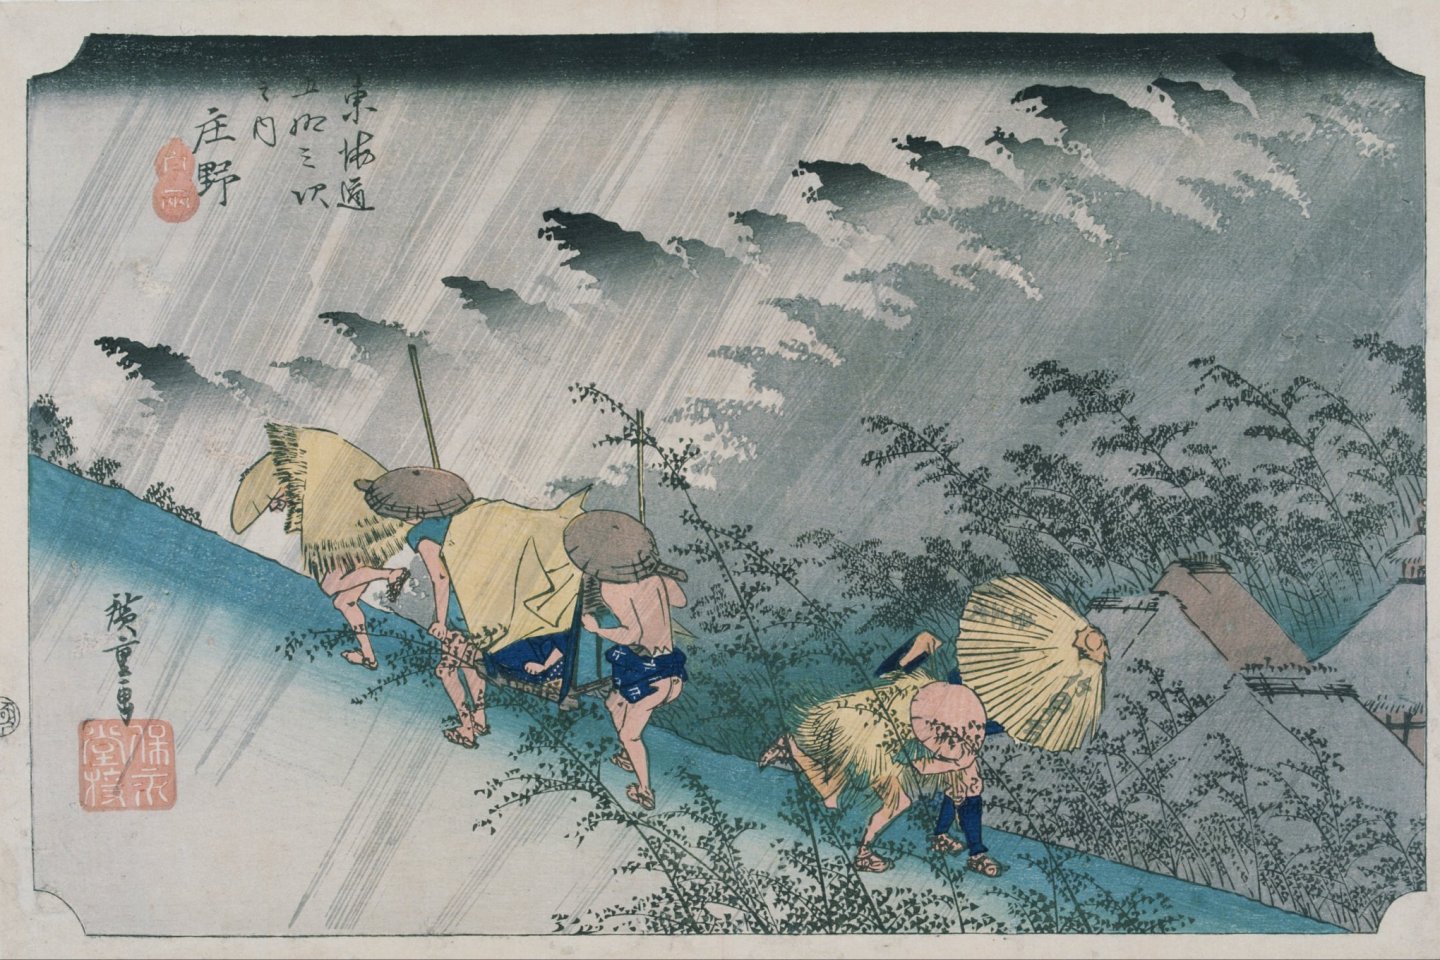 The atmospheric landscaping of Hiroshige